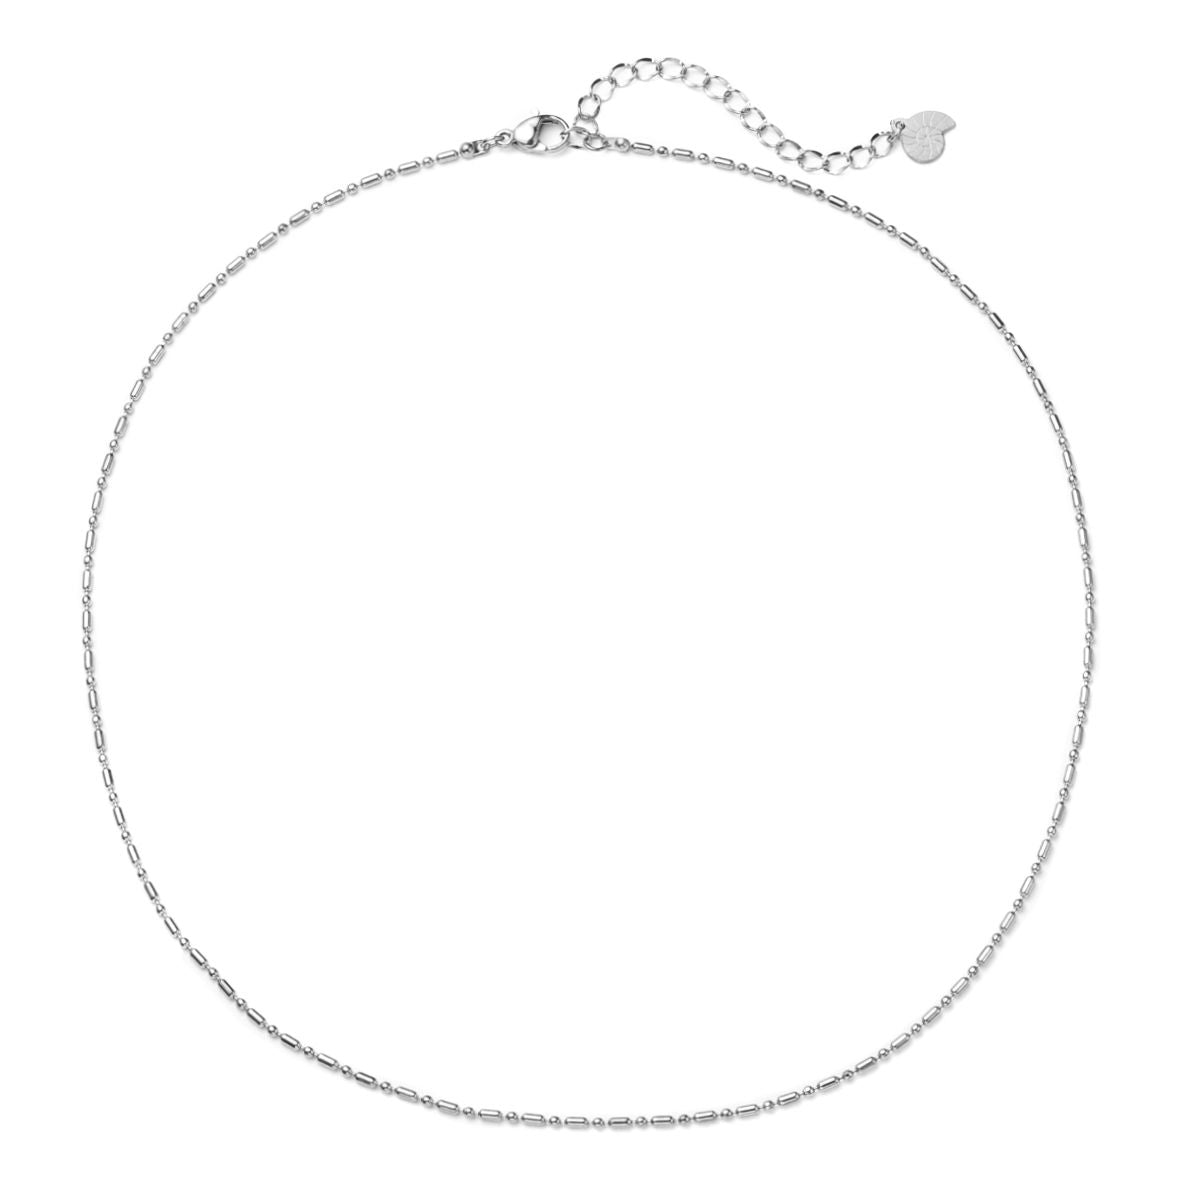 Bead and Bar Chain Necklace Silver